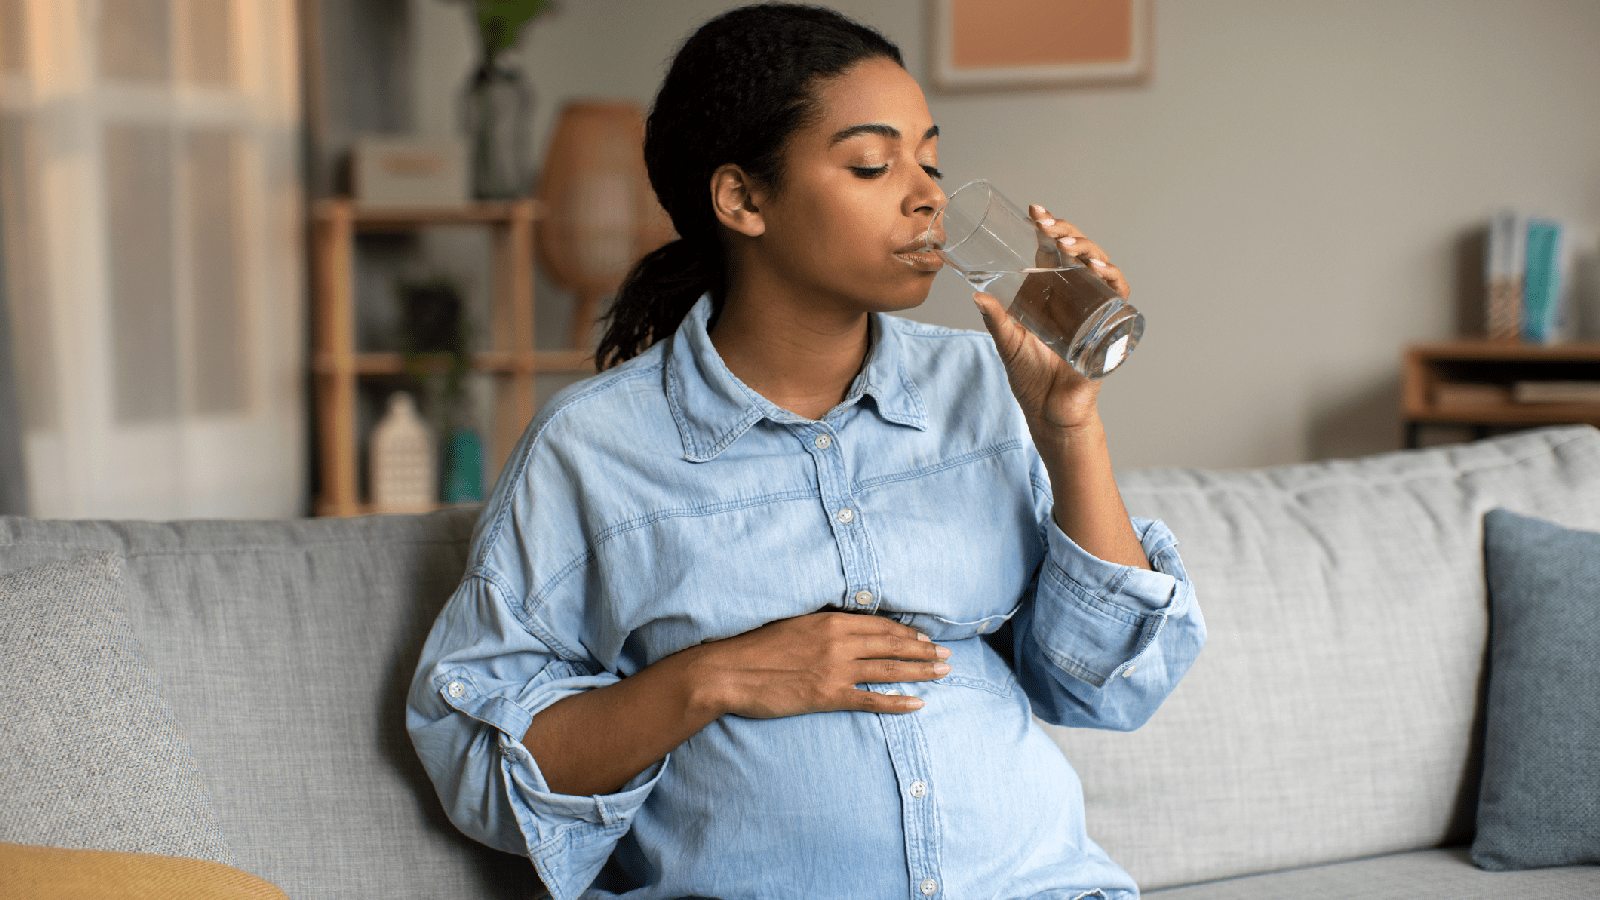 A pregnant, African-American woman in a blue shirt drinks water on a grey couch.